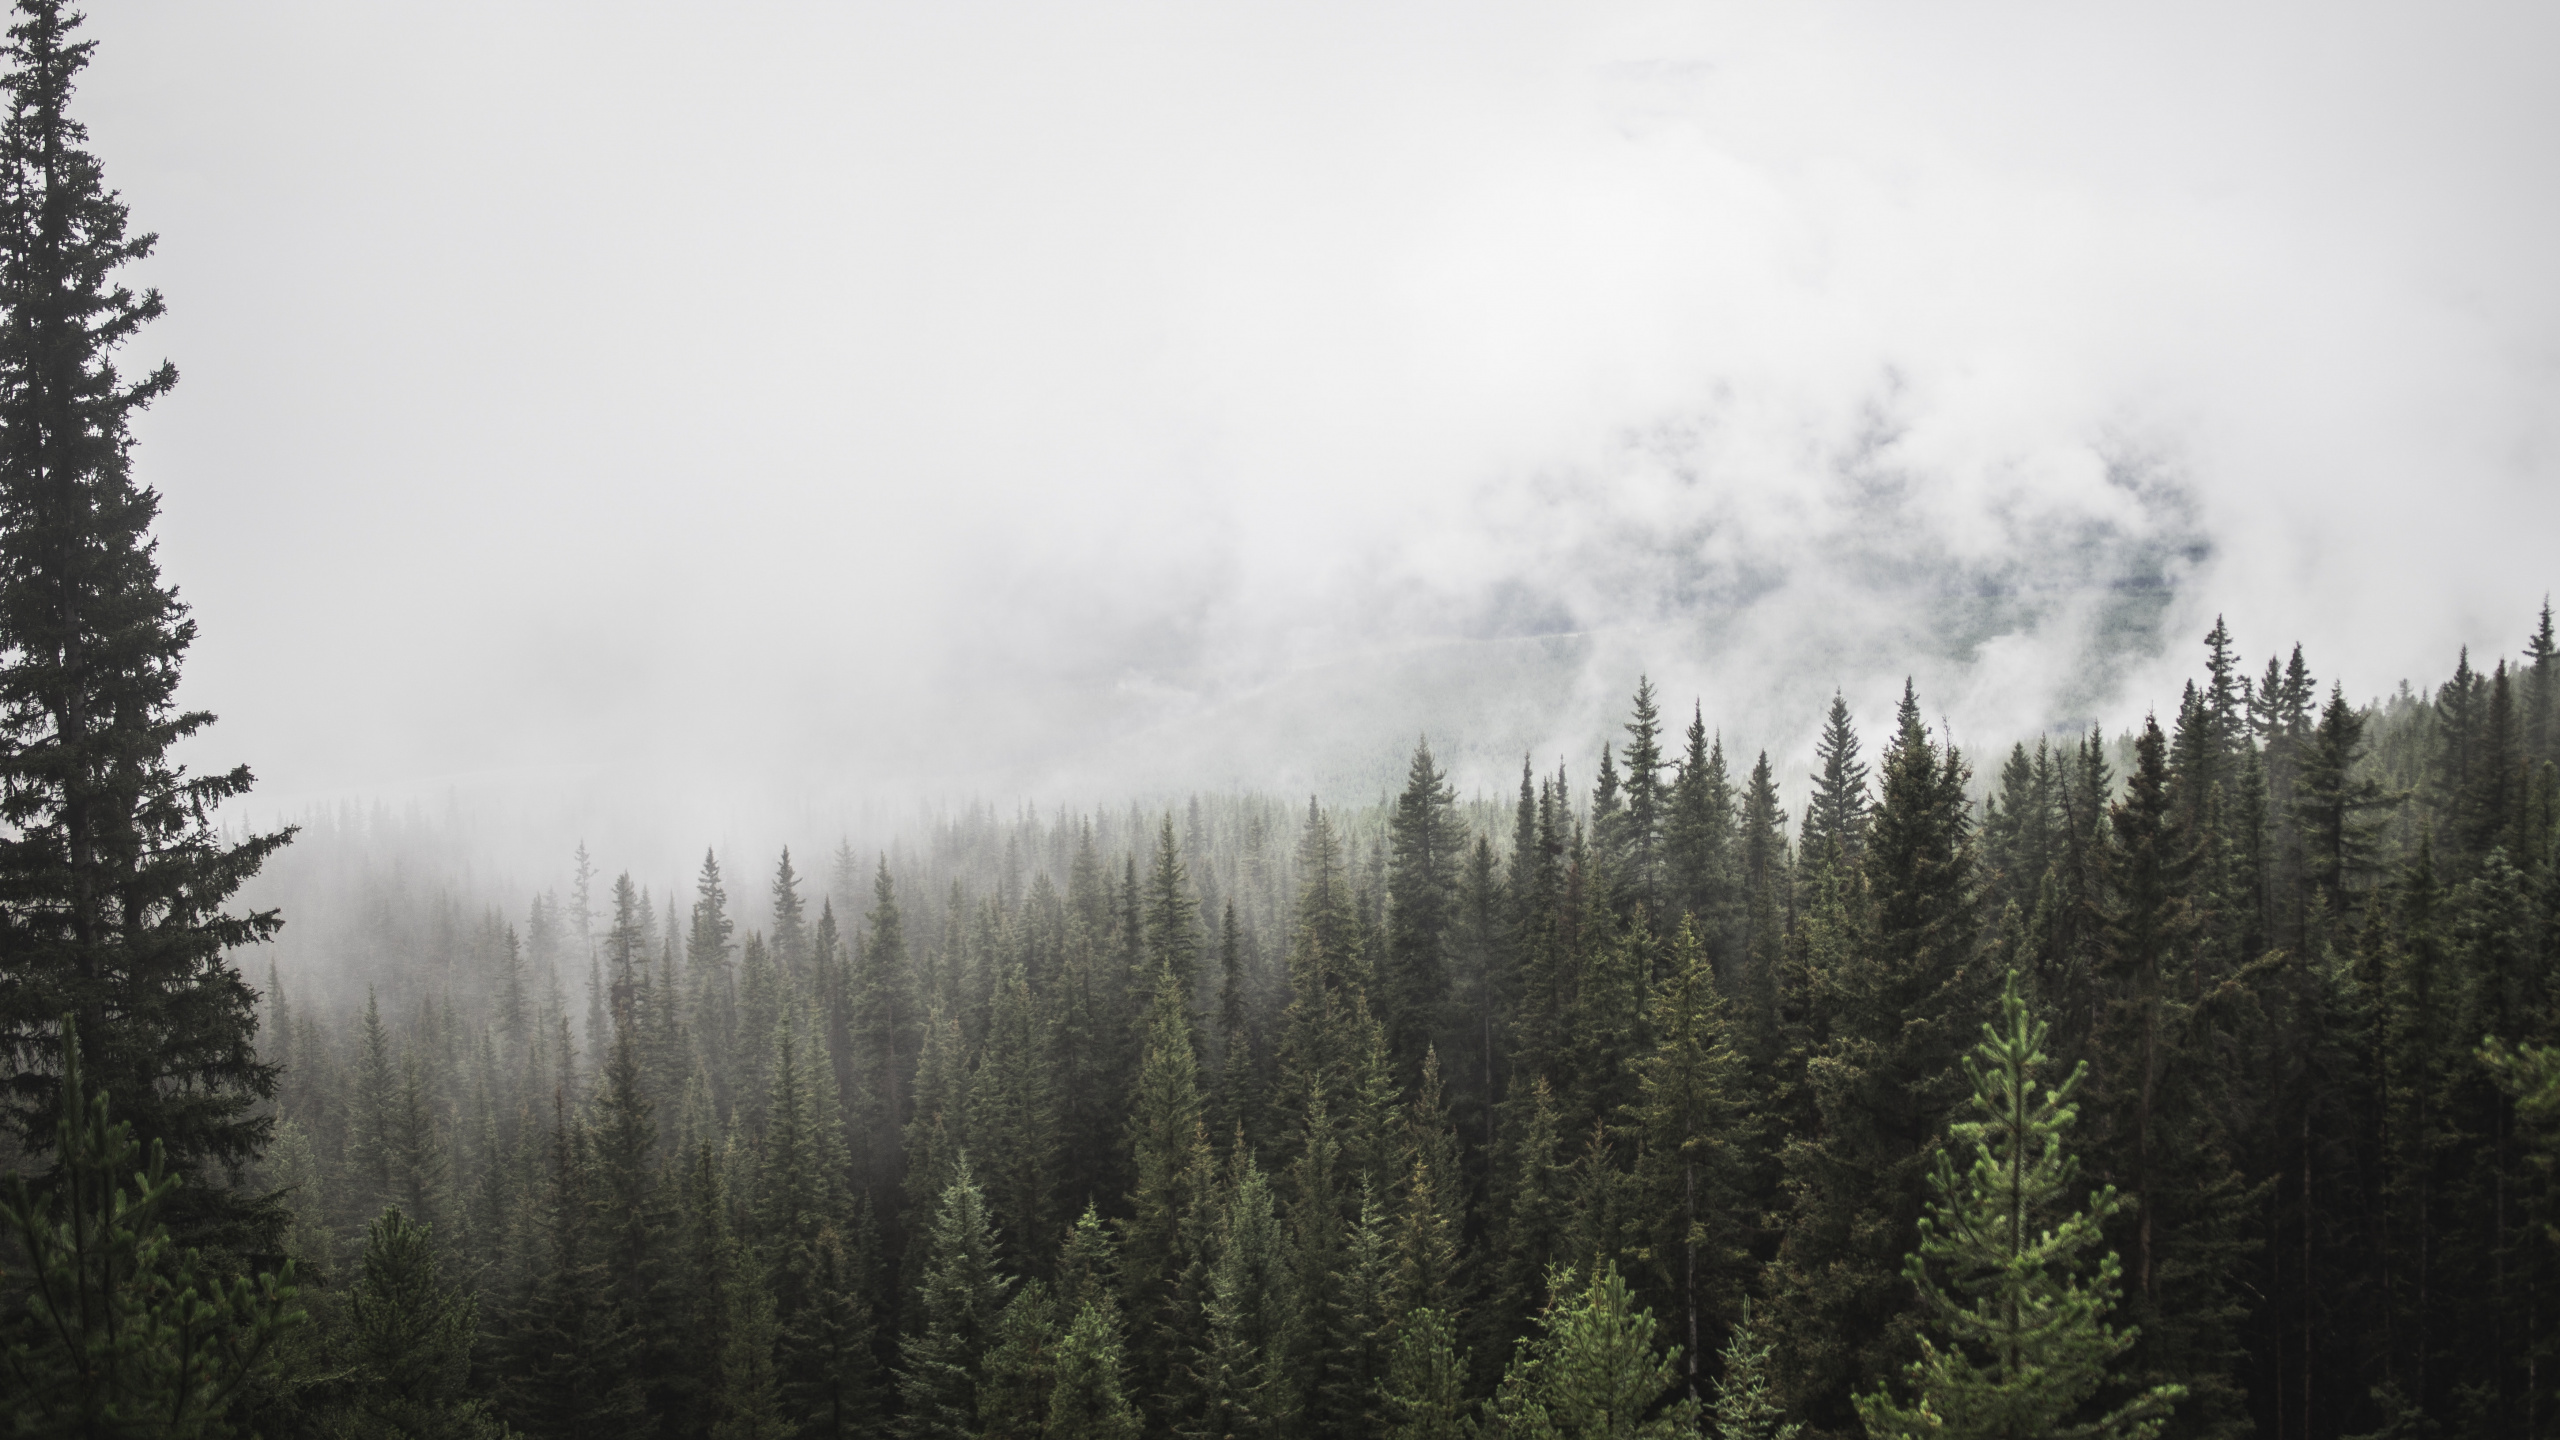 Green Pine Trees Covered With Fog. Wallpaper in 2560x1440 Resolution